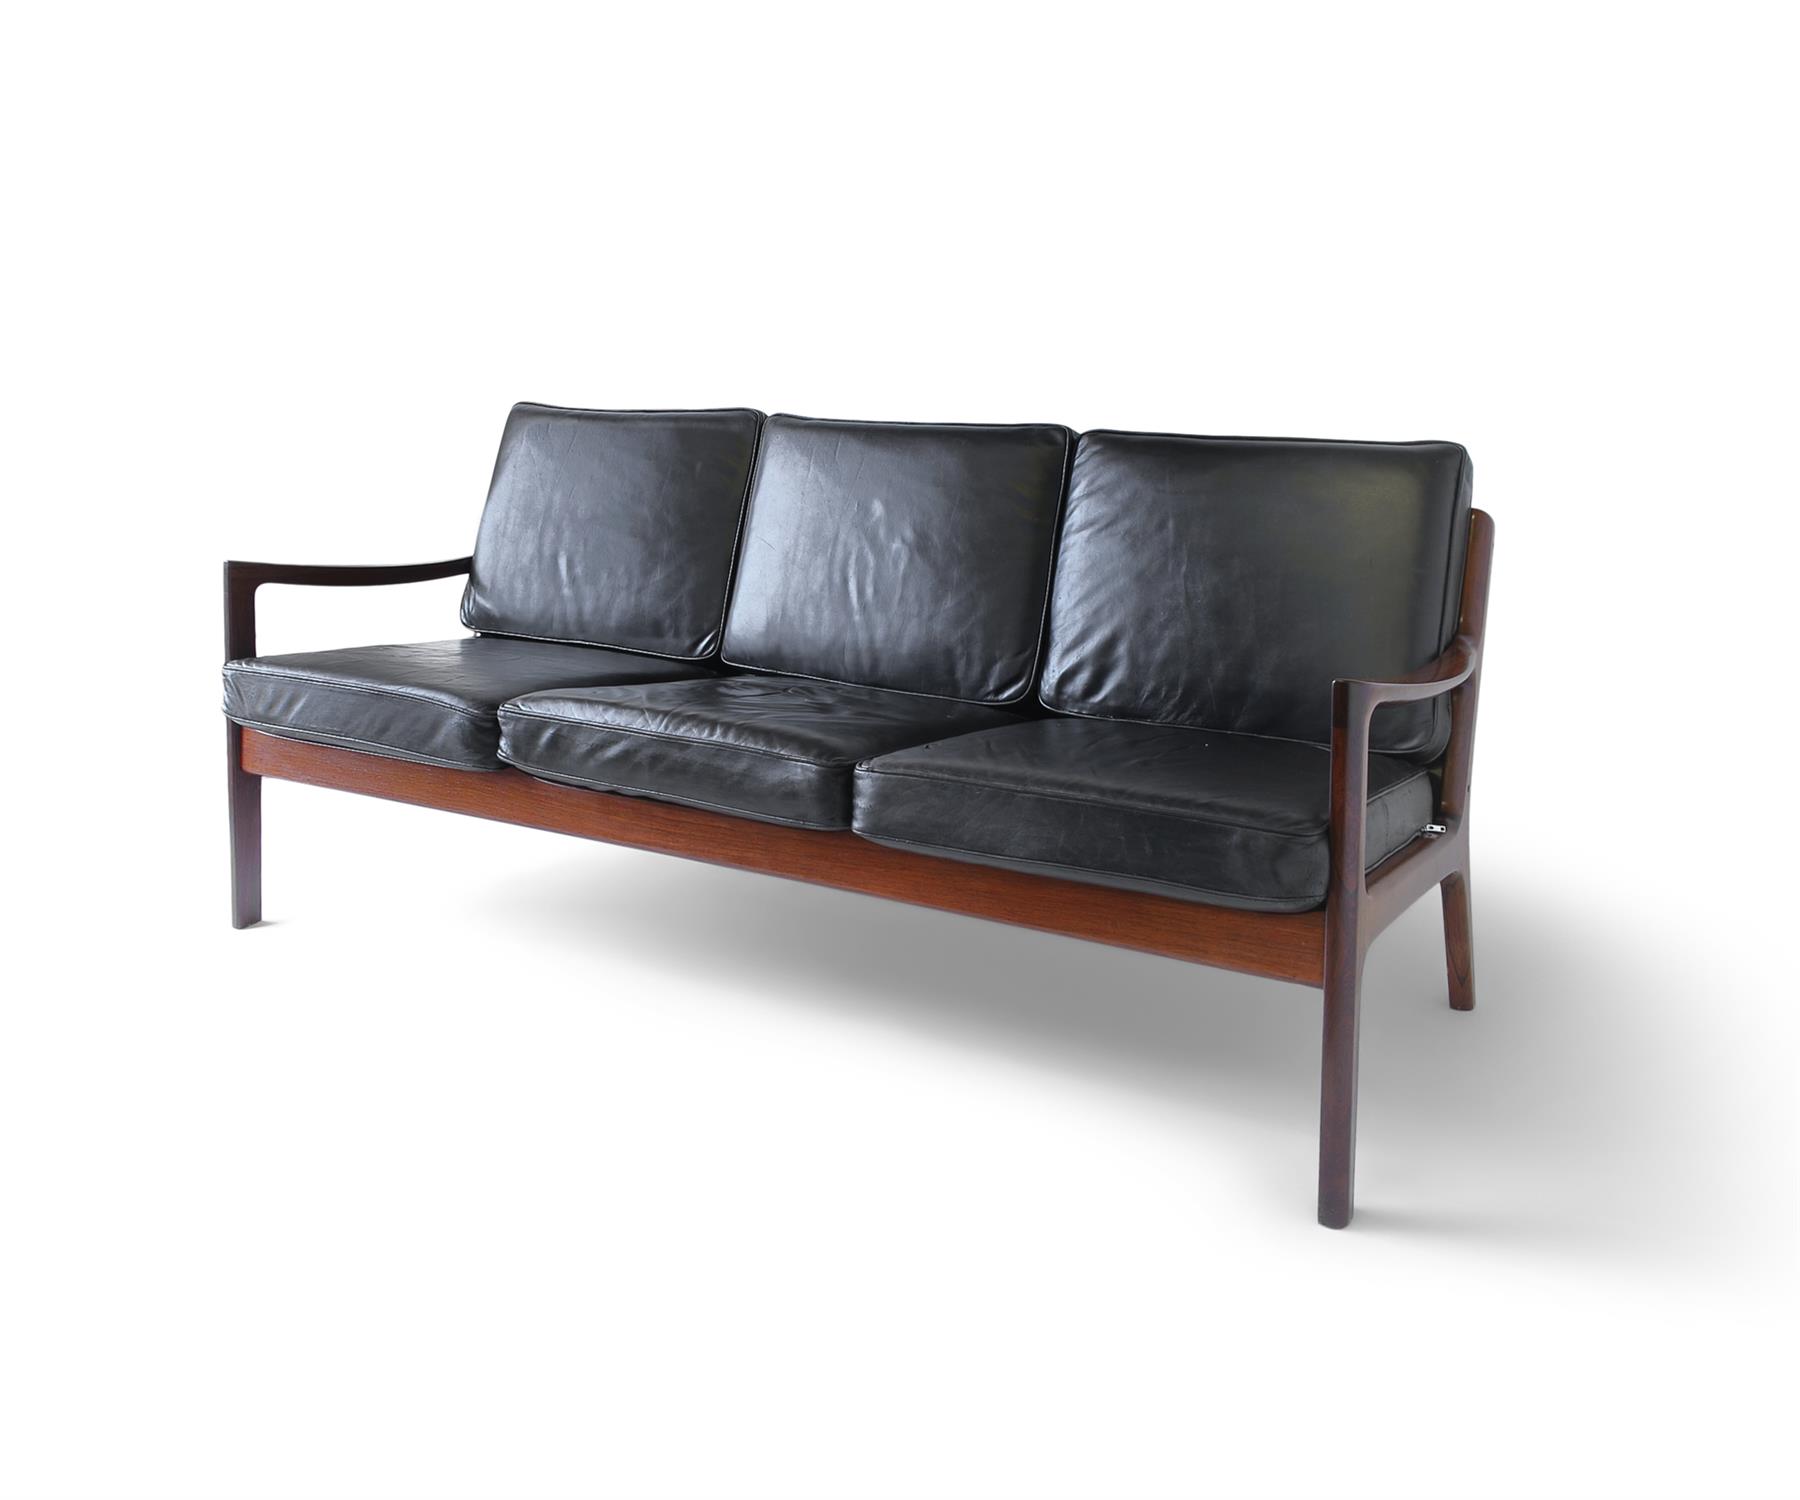 OLE WANSCHER A three-seater sofa by Ole Wanscher, produced by France & Son. Denmark, c.1960,